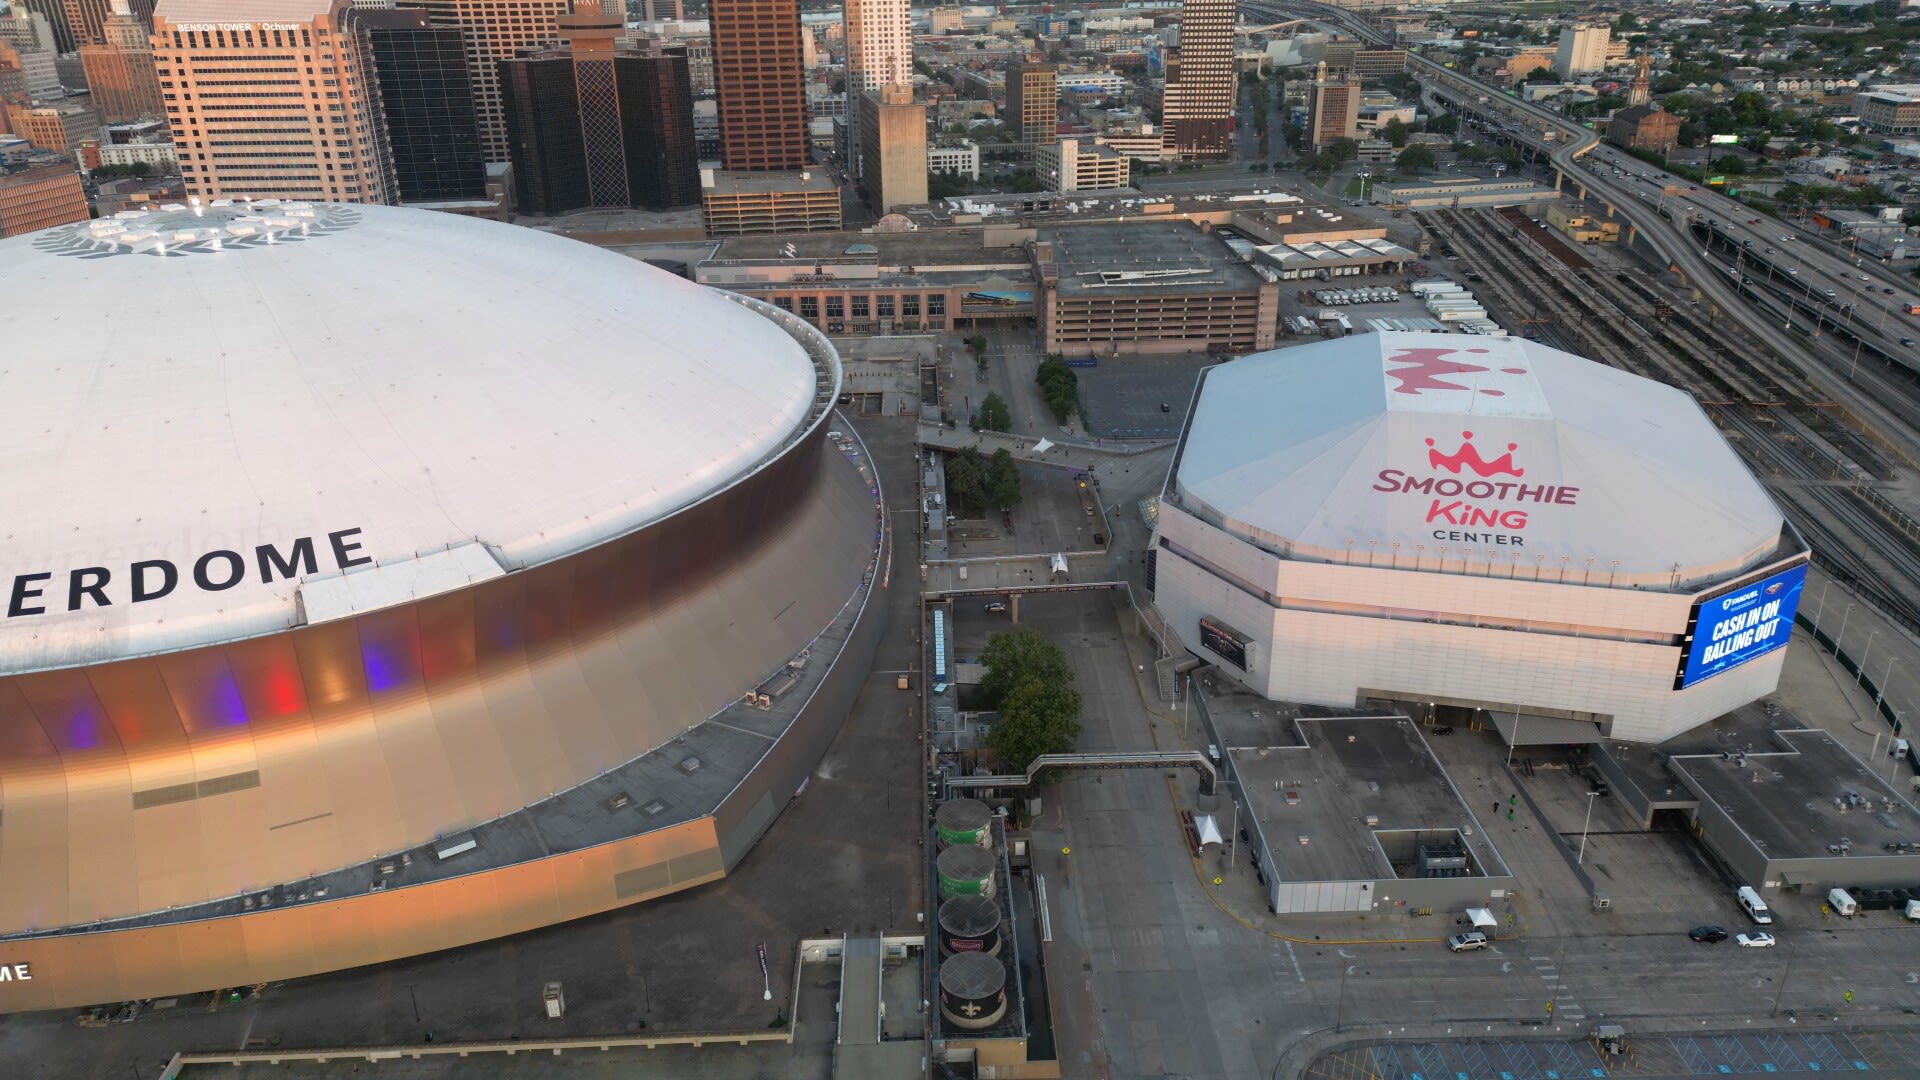 Dispute emerges over Saints' payments for Superdome upgrades